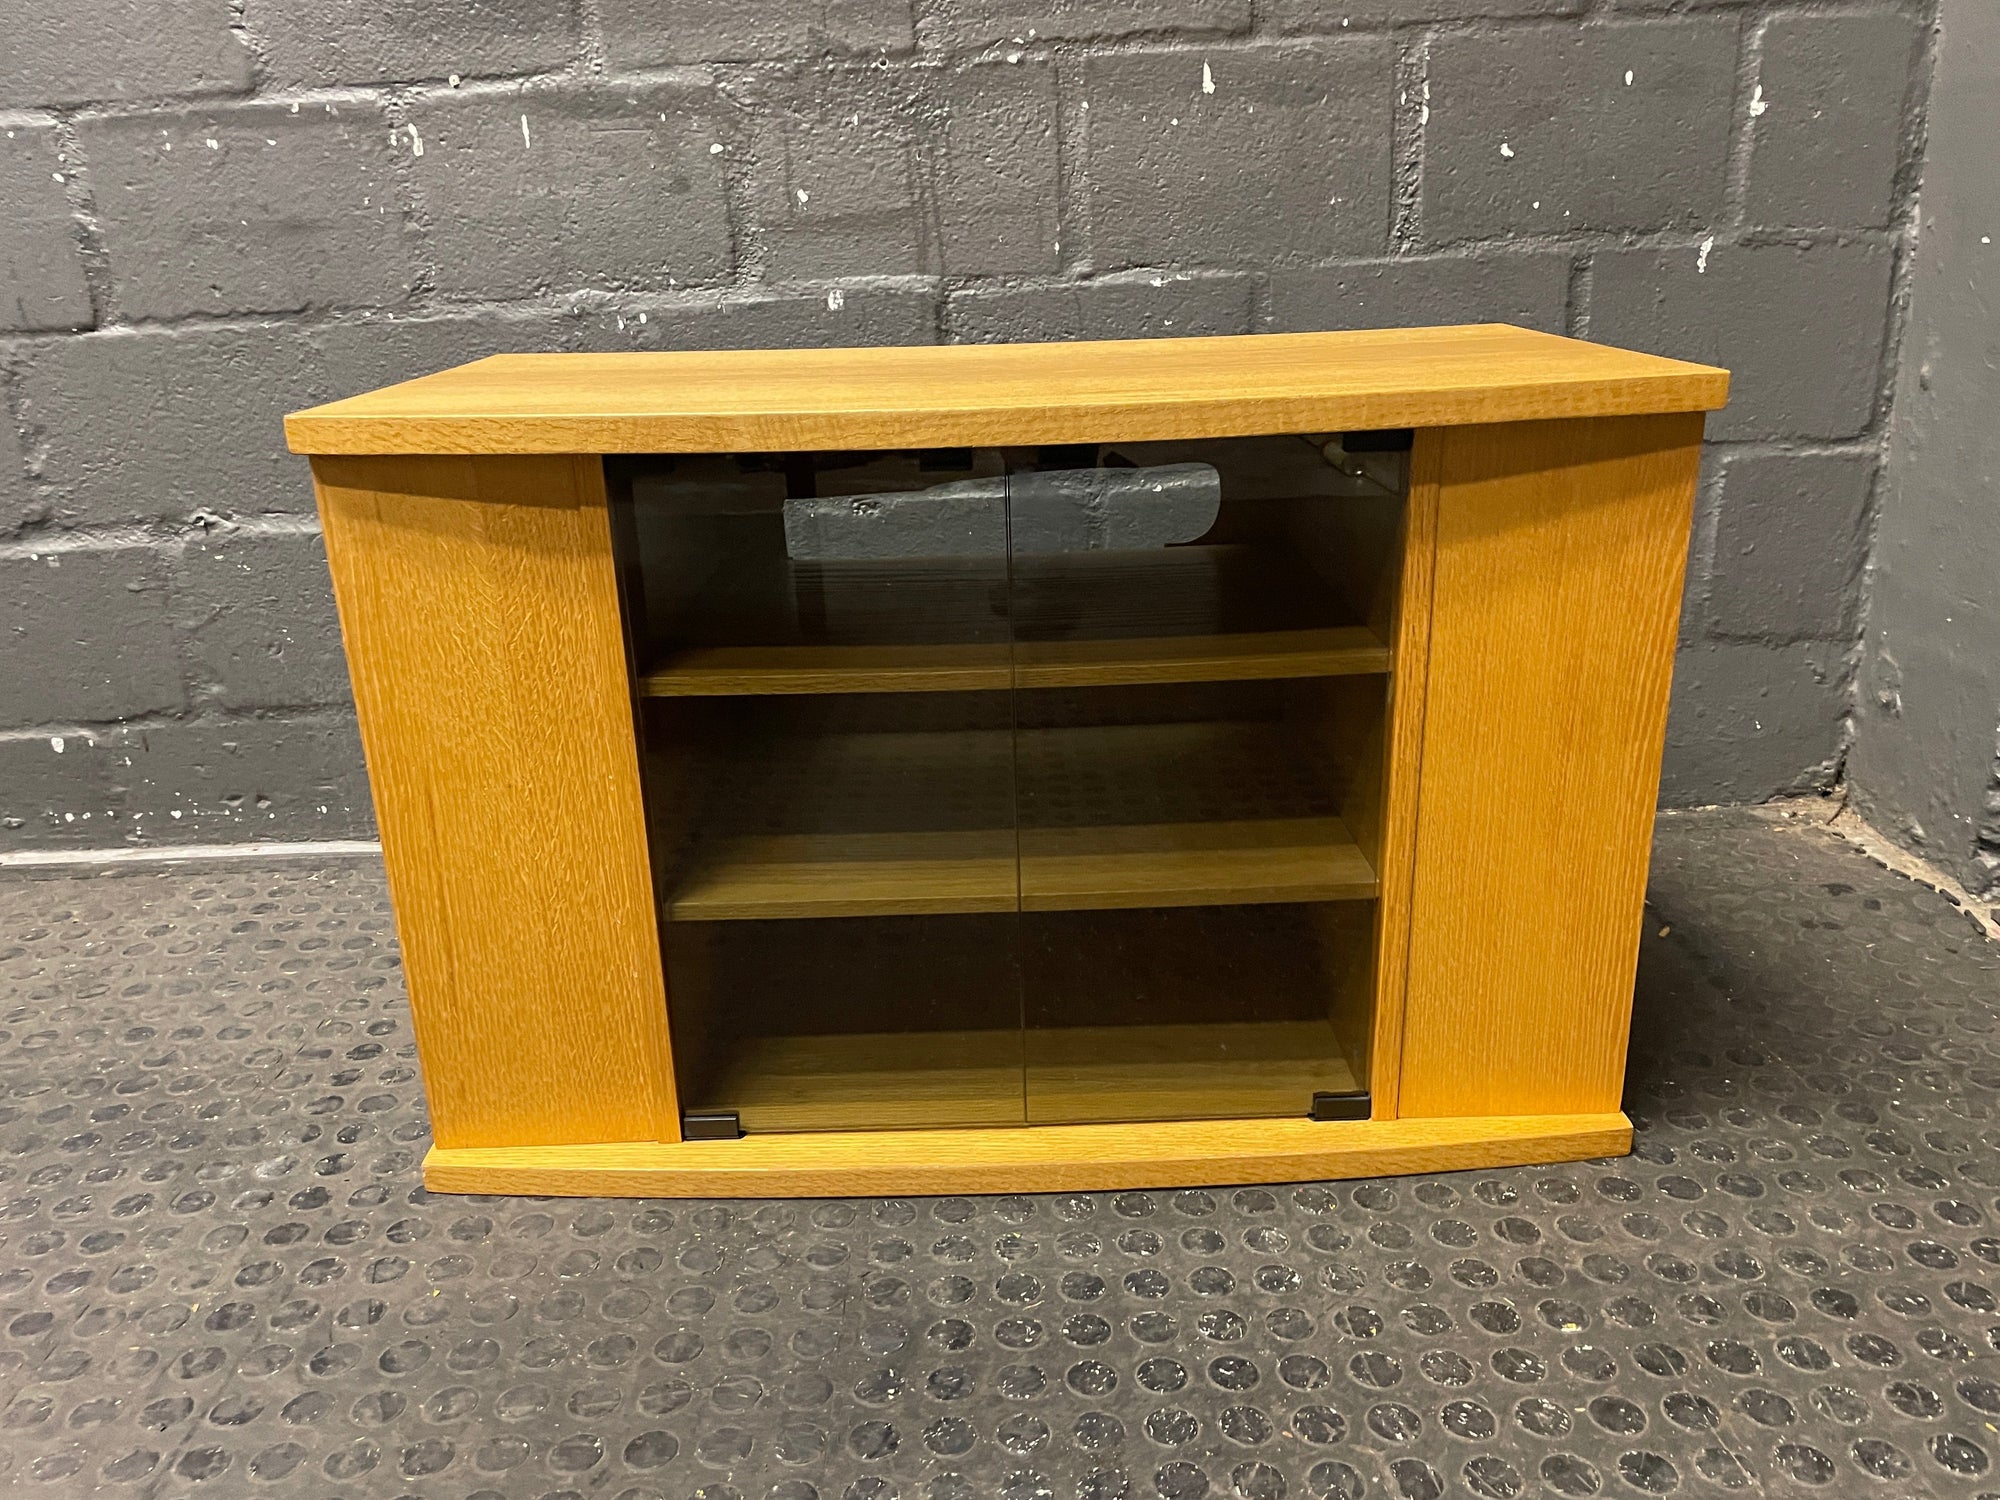 Oak Wood Tv Stand(Glass Front) - PRICE DROP